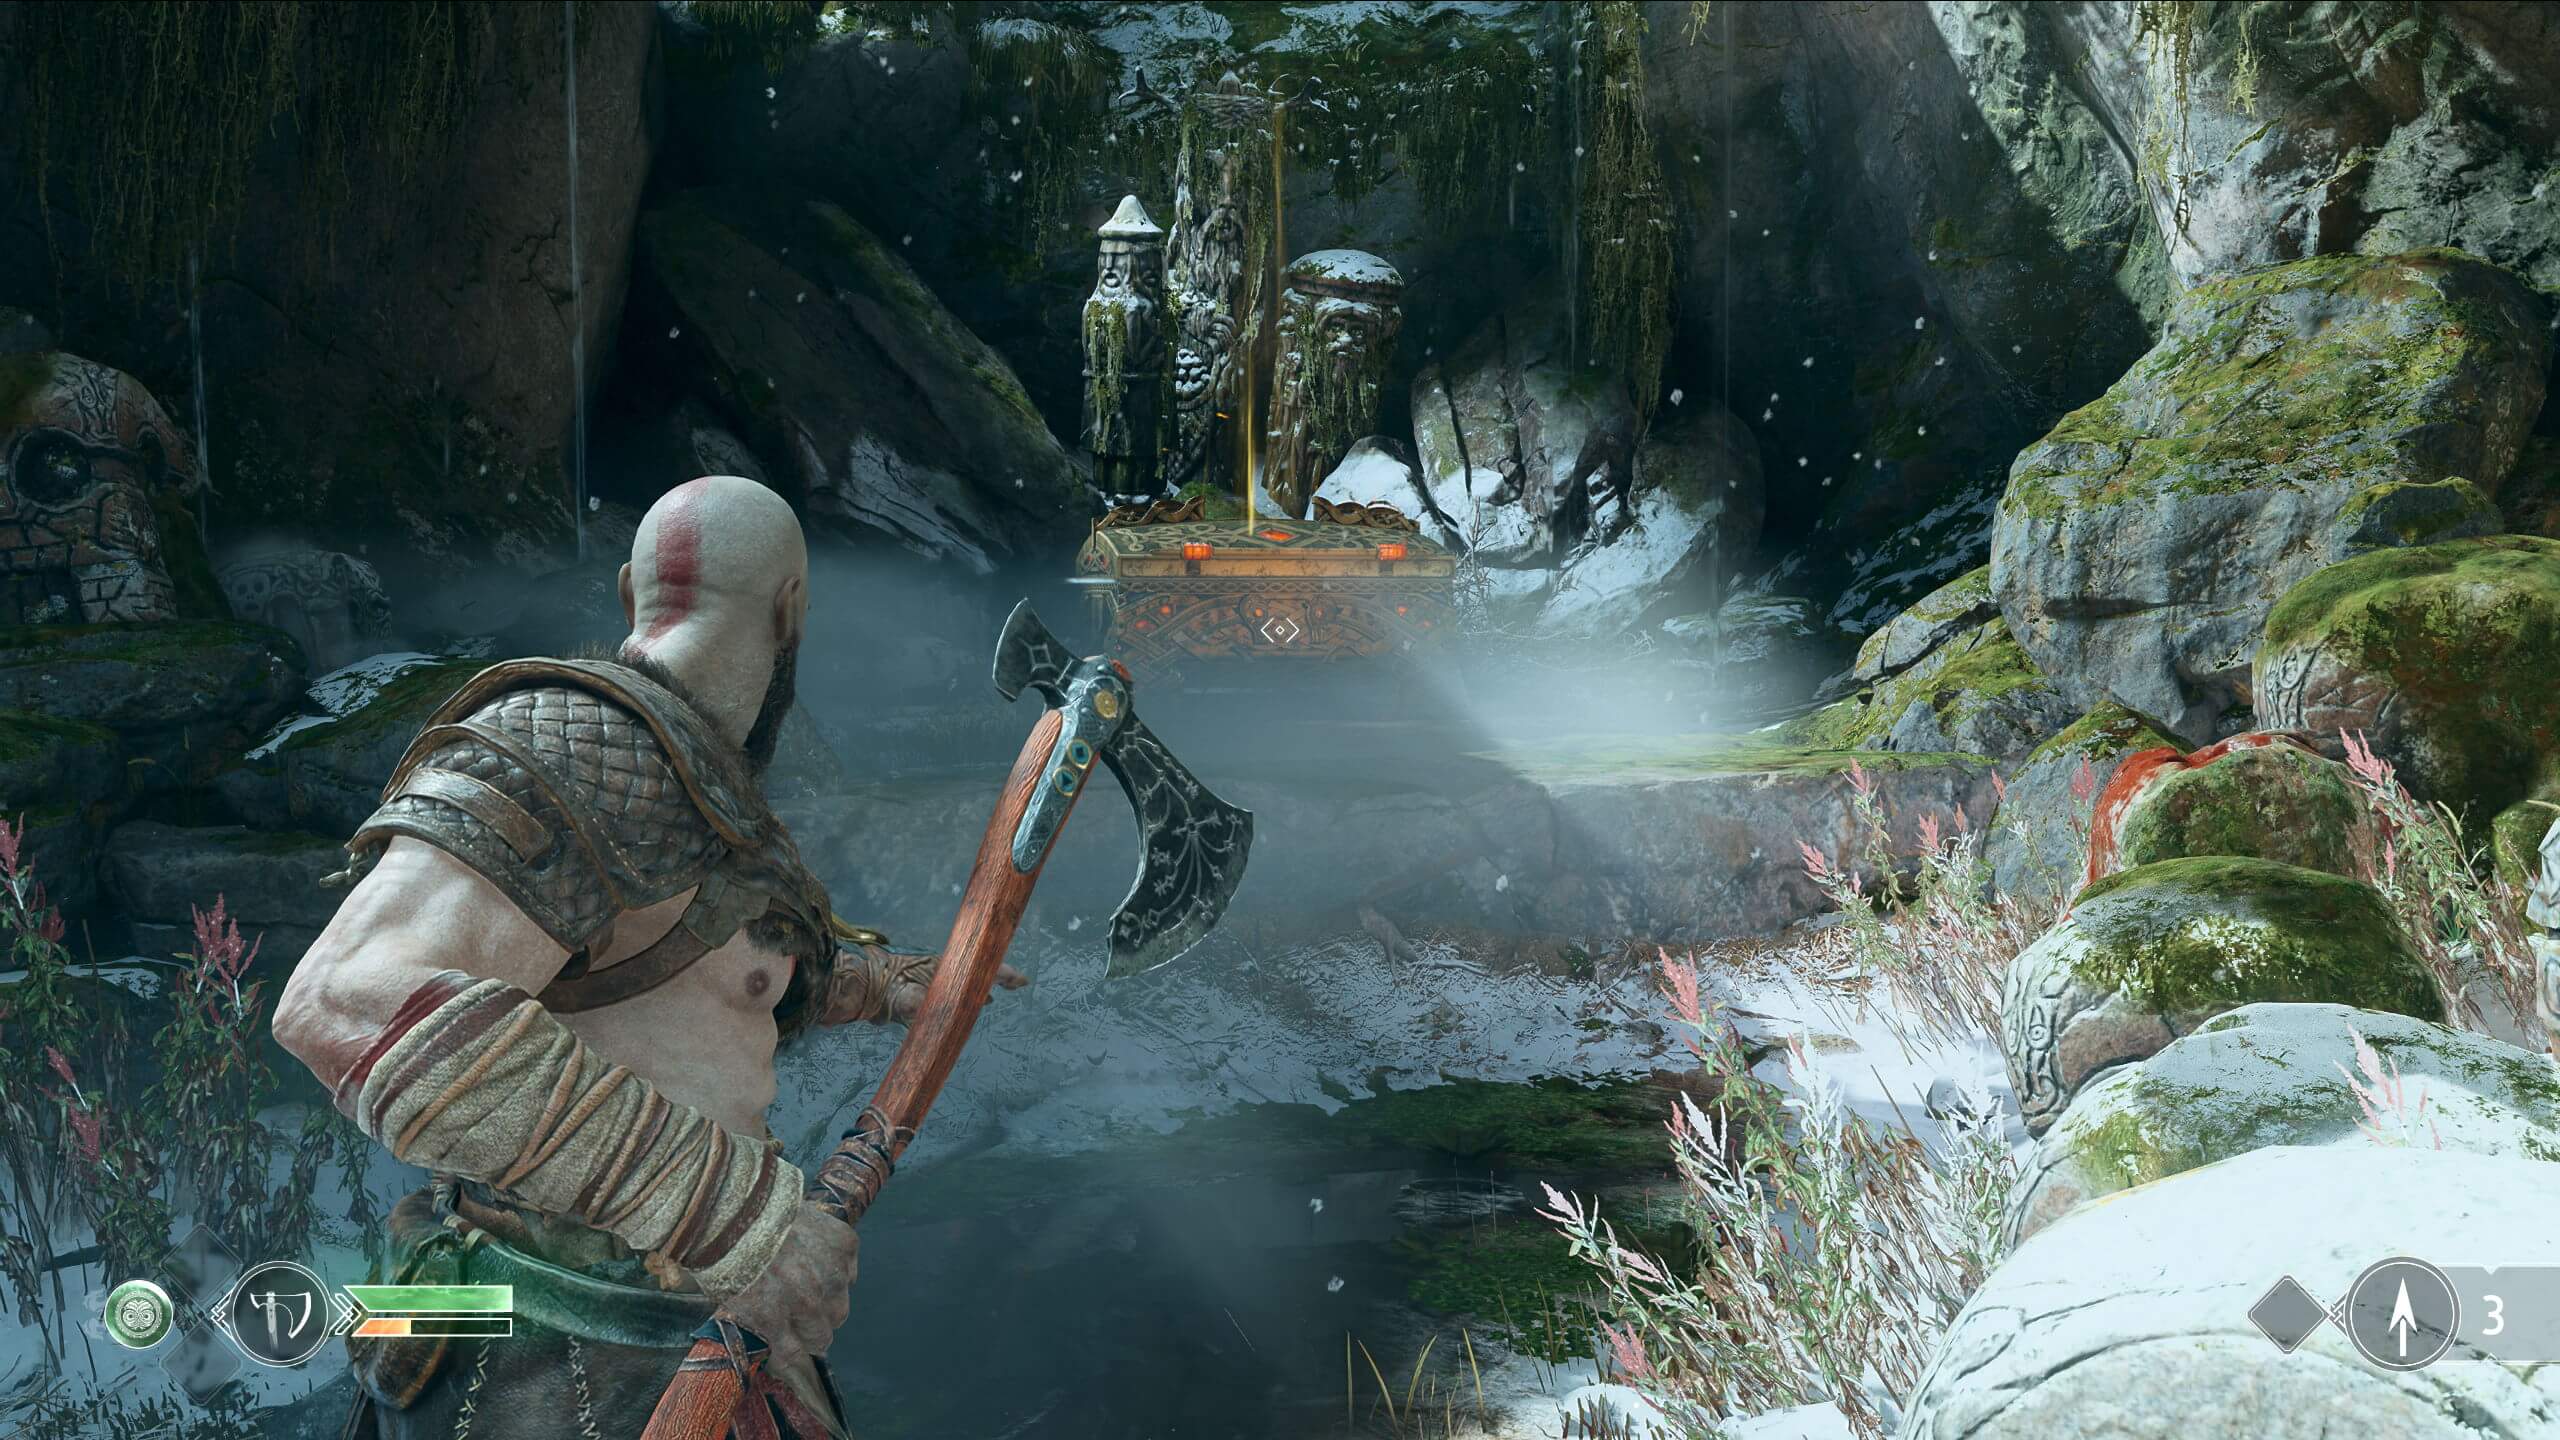 God of War PC Features Trailer Shows Off 4K DLSS Gameplay, PC Requirements  Revealed